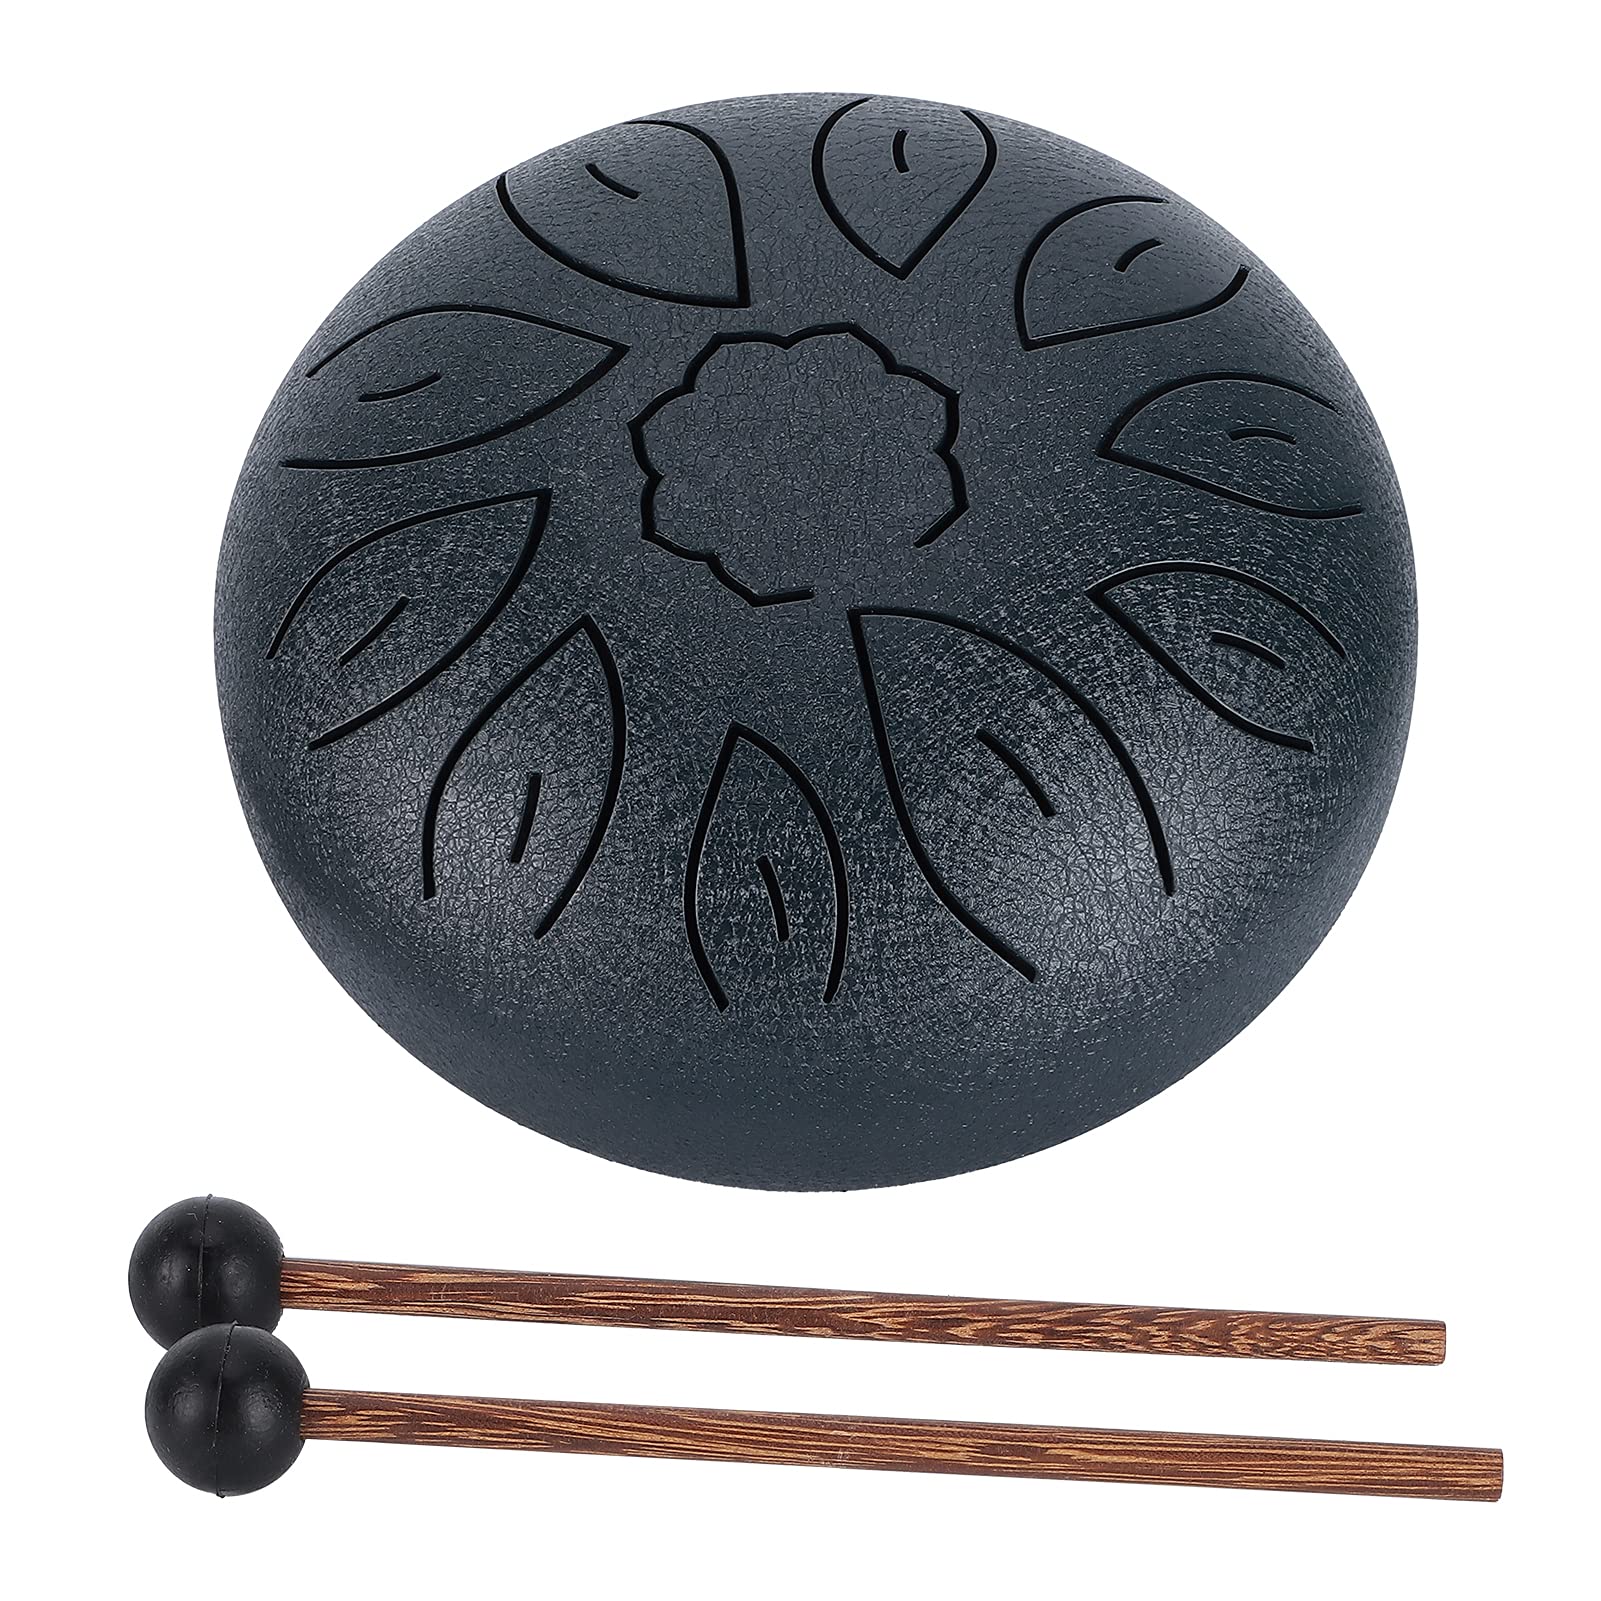 Steel Tongue Drum Kit, Ethereal Tongue Drum 11 Ton 6-Zoll Ethereal Worry-Free for Kids Friends Gift